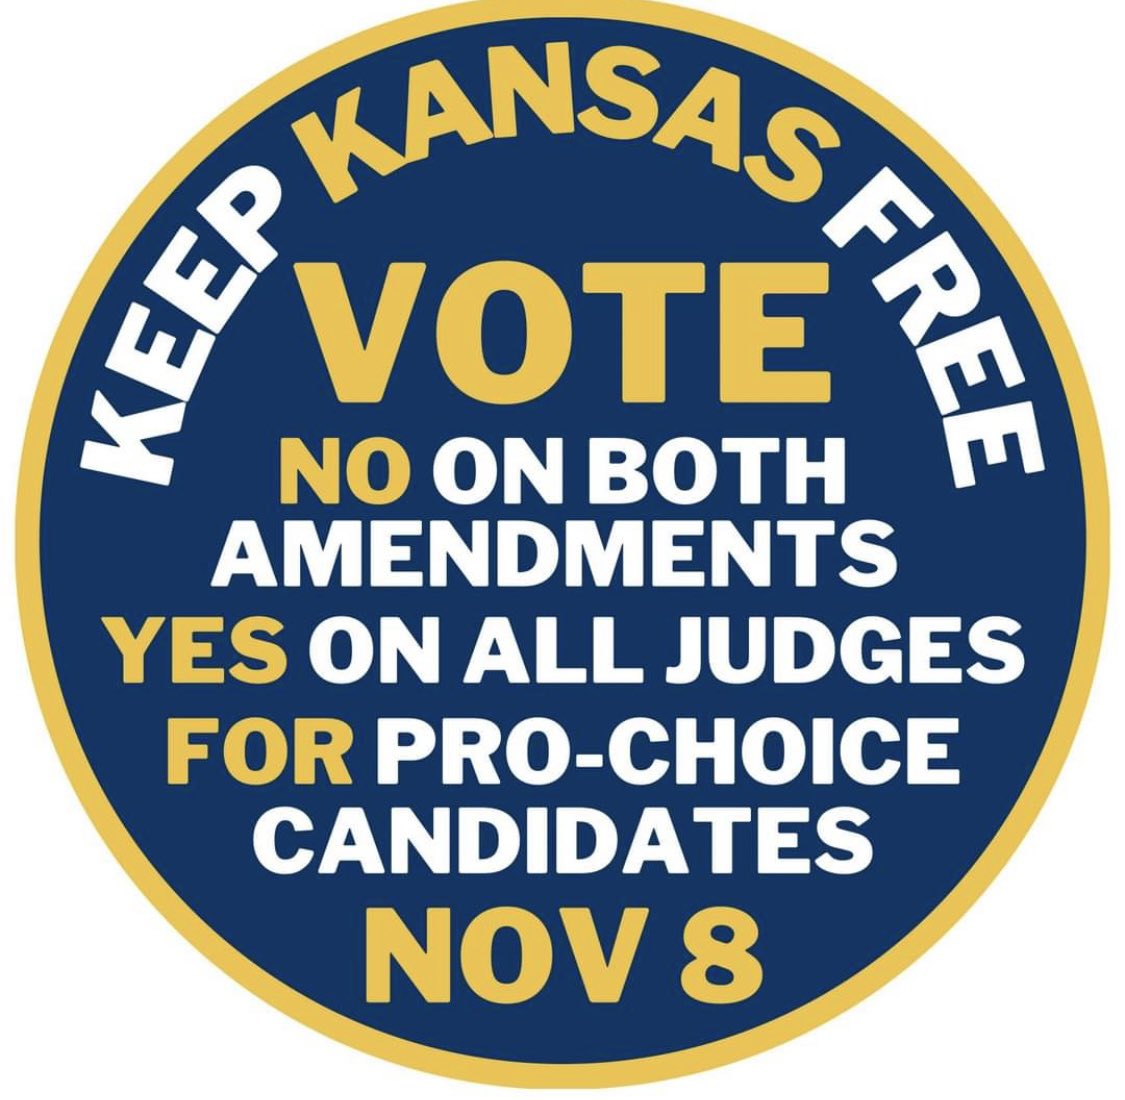 Future access to reproductive healthcare, funding of public schools, your right to vote, & much more are on the ballot this November! #VOTE #ELECTION2022 #ksleg